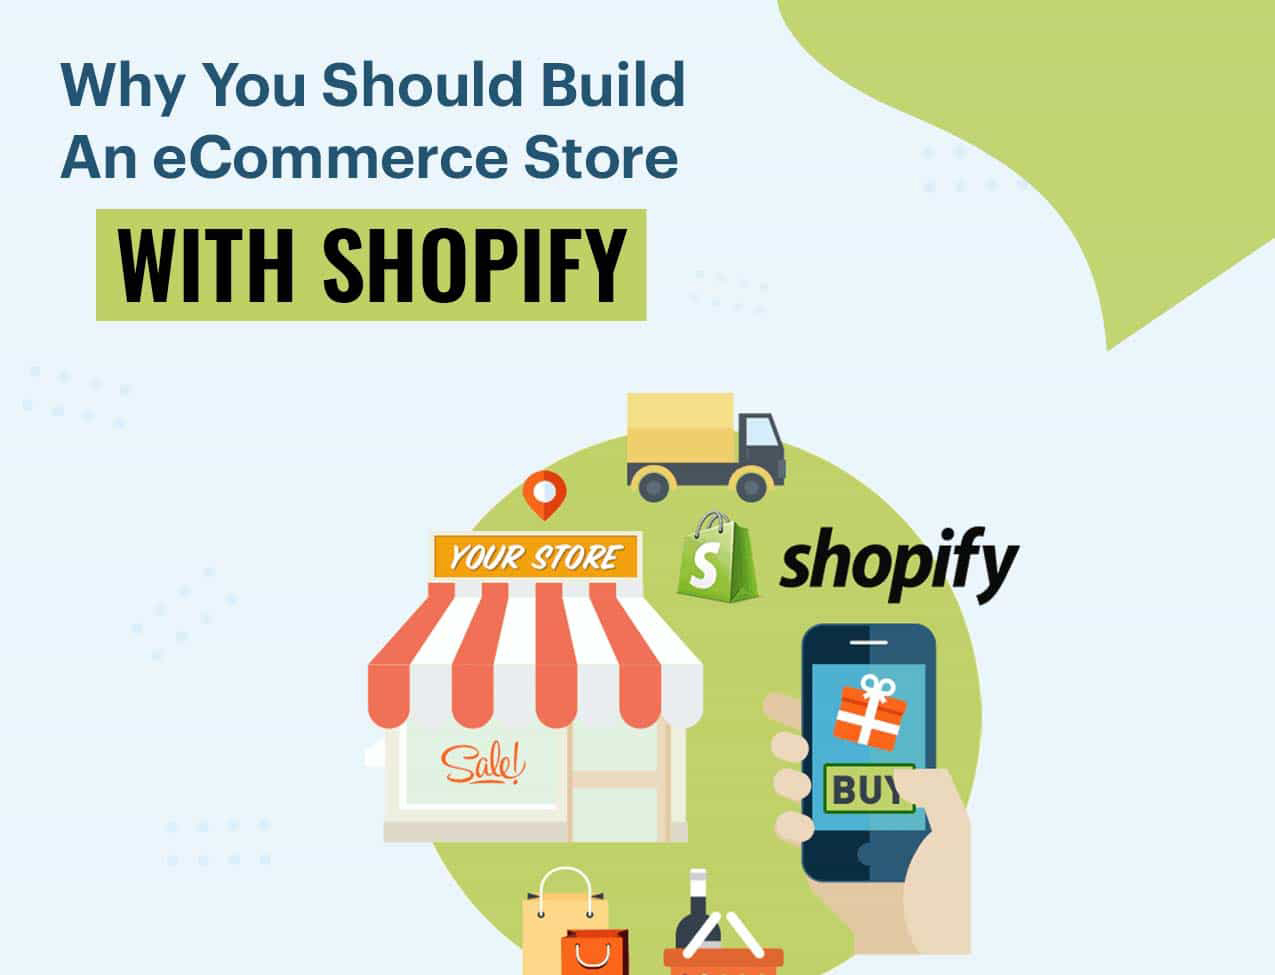 Why You Should Build An Ecommerce Store With Shopify?